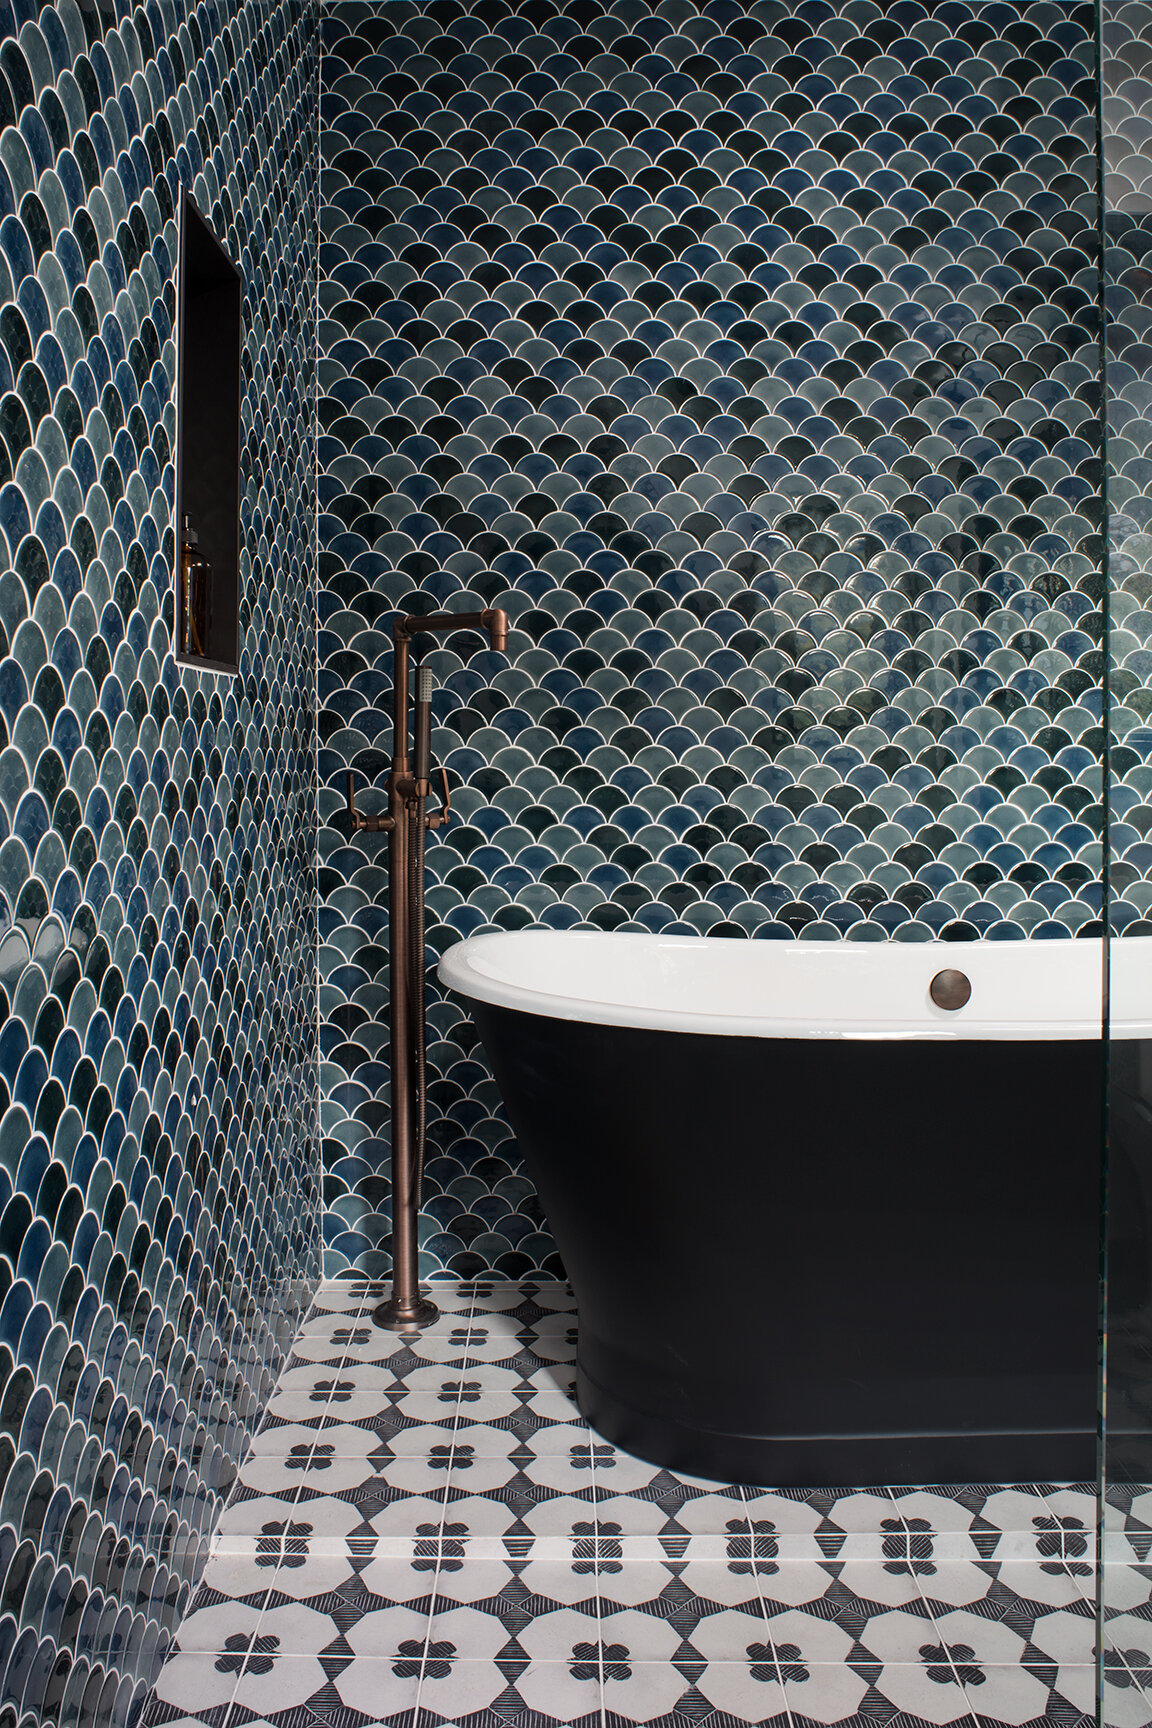 Elevate Your Home with Innovative Bathroom Design | Breeze Giannasio